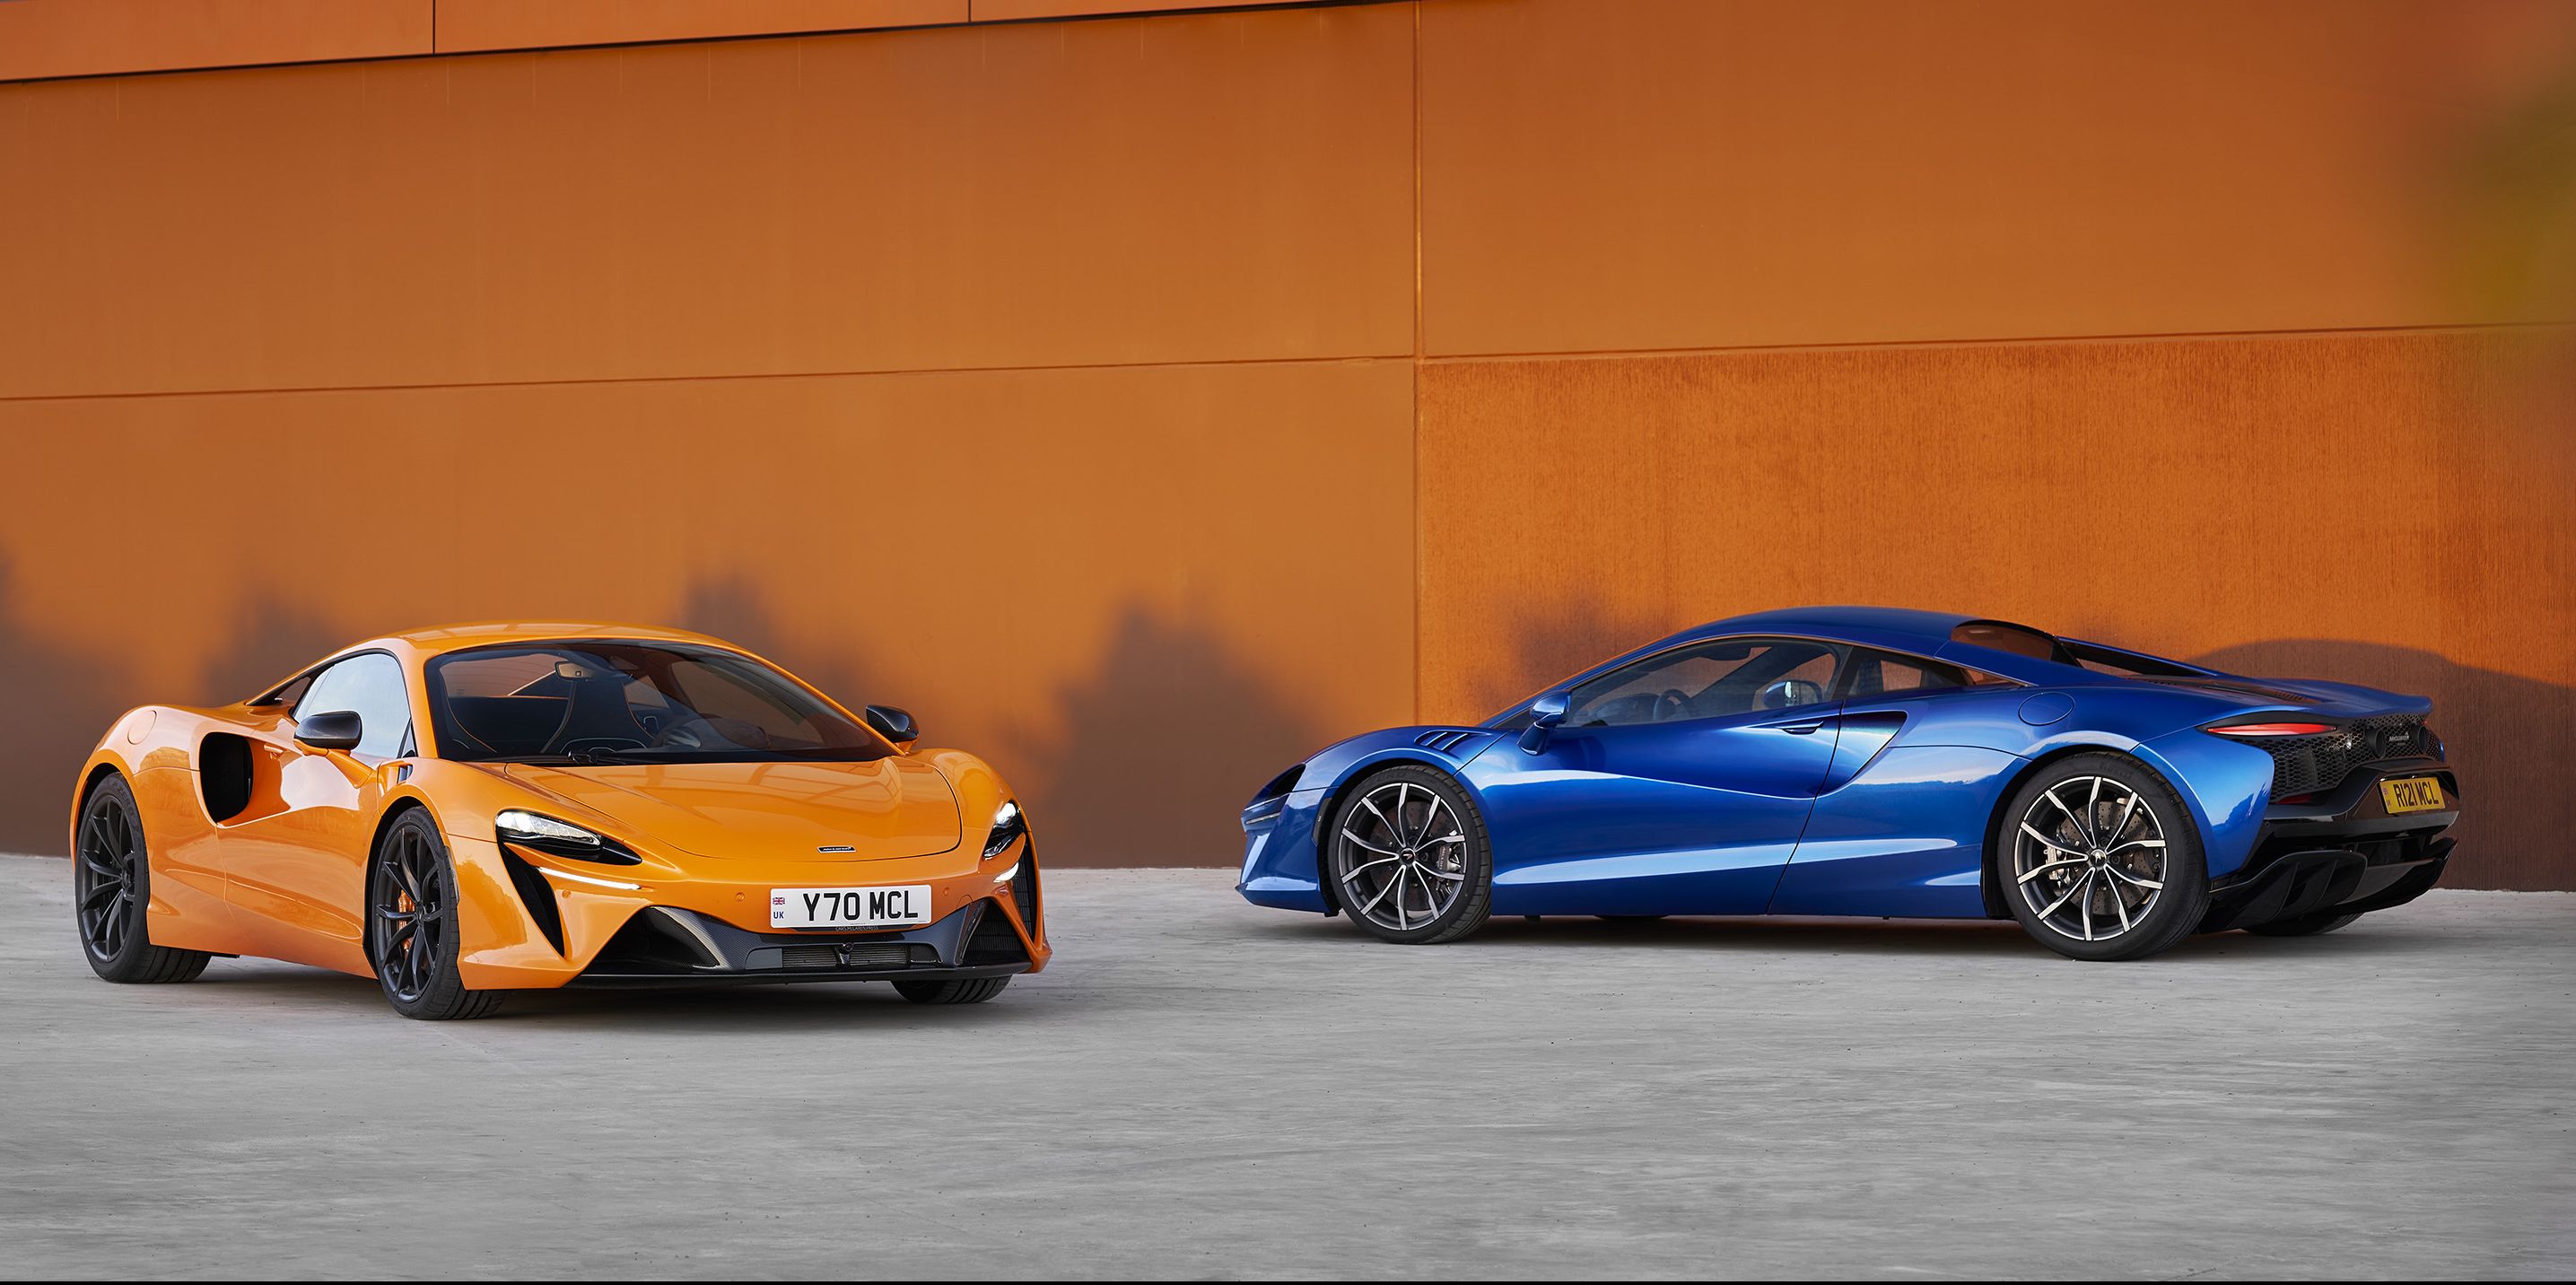 McLaren's Post-Pandemic Rebirth Is Off to a Rocky Start